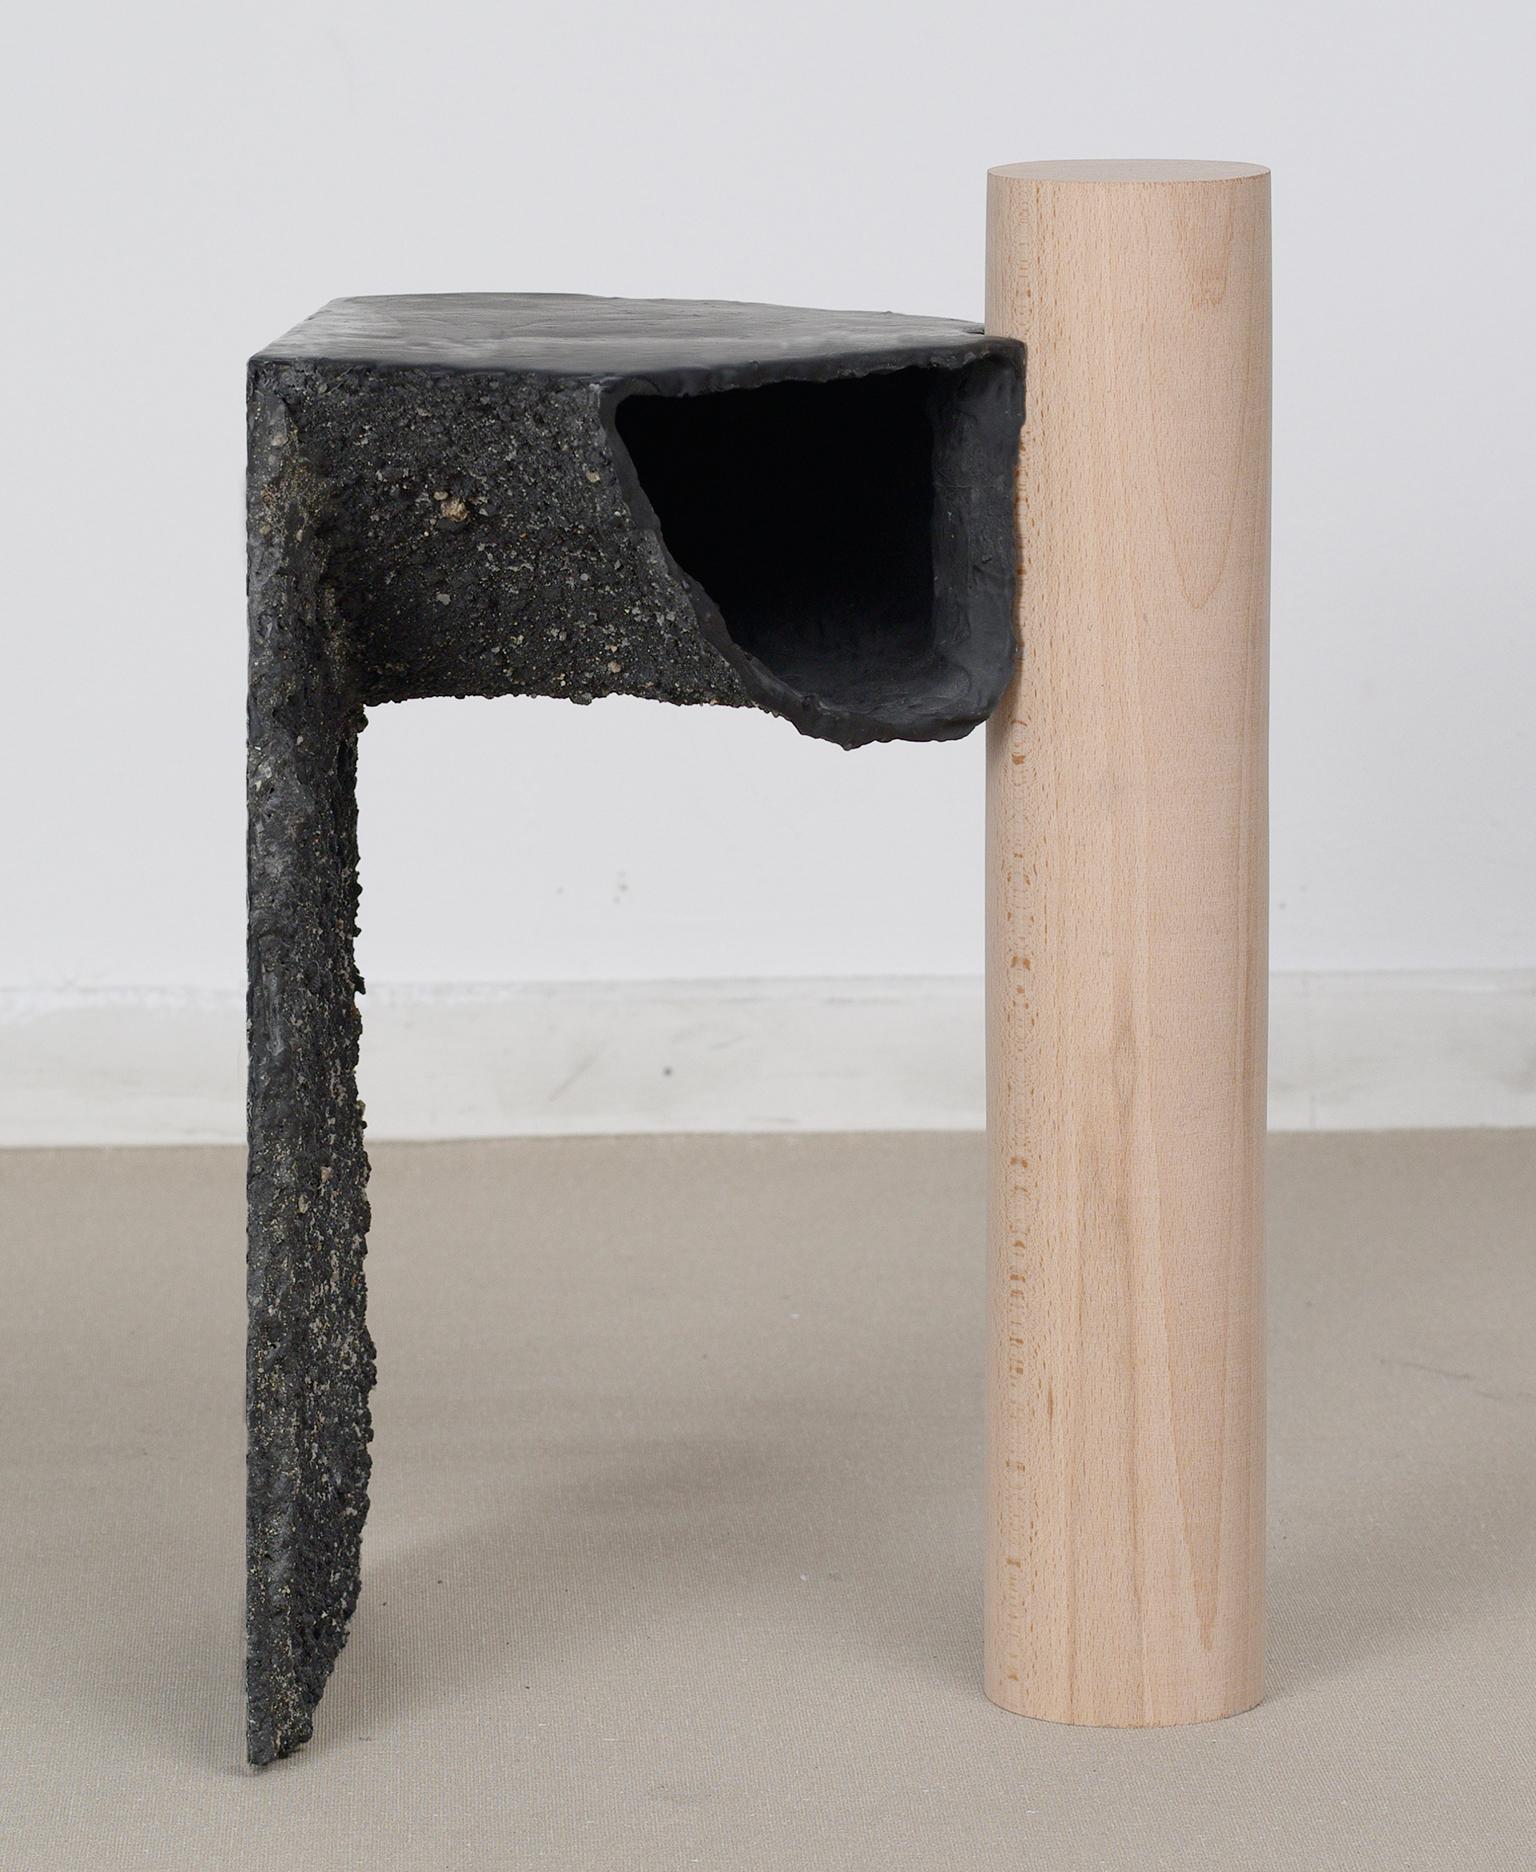 Studio La Cube for camp design gallery
R5, side table 2018
Water resin, wood, Jesmonite with black pigment, sand leftovers and silicone
Measures: H 45, L 30, W 28 cm
Unique piece
Spain

Photo credit/ Alec Iatan

The idea of this project is